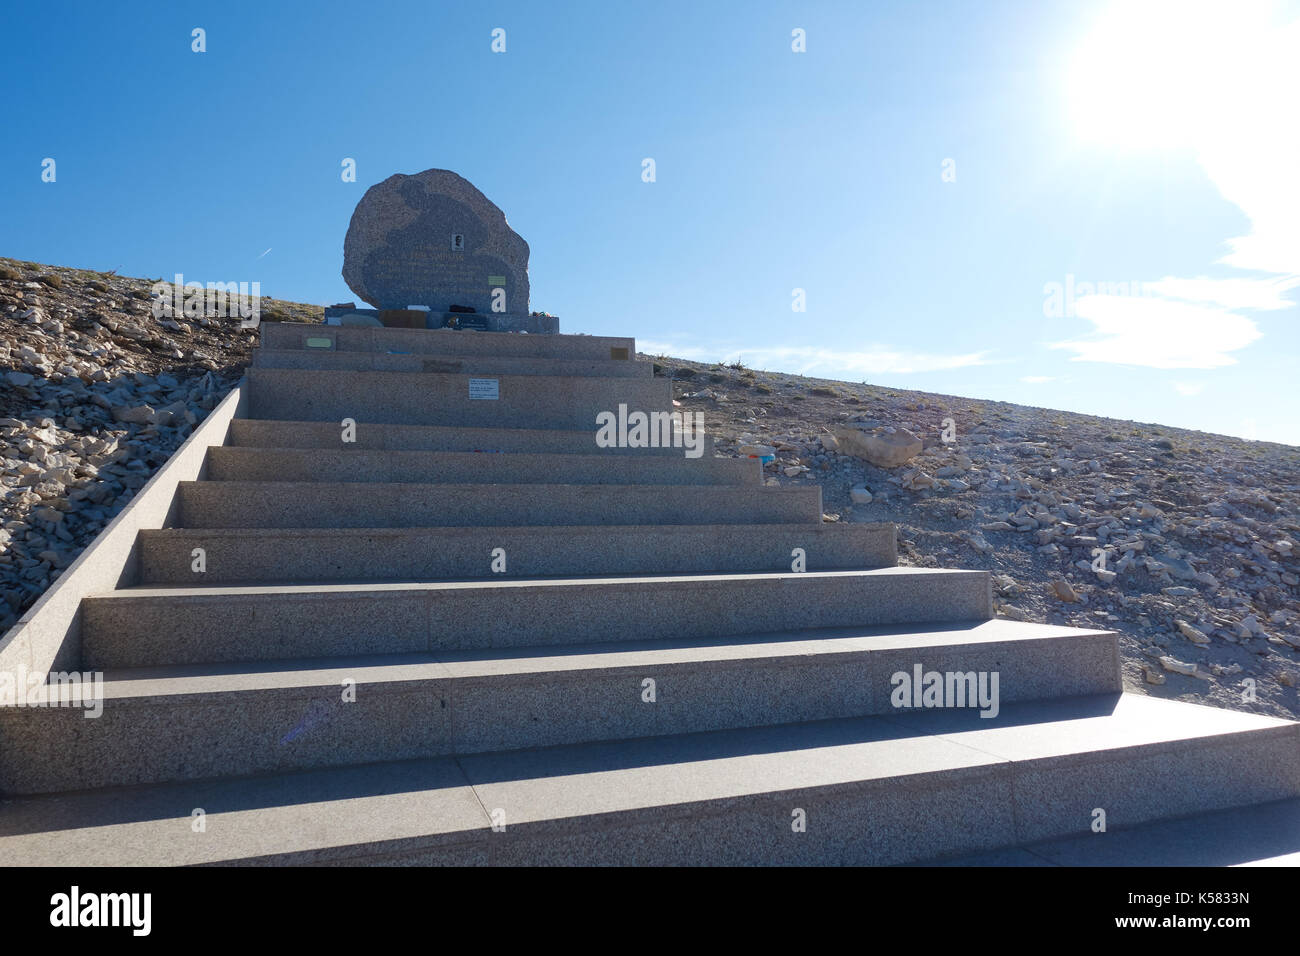 Memorial to cyclist Tom Simpson with new steps, Mont Ventoux, Vaucluse, Provence-Alpes-Cote d'Azur, Southern France, Europe Stock Photo